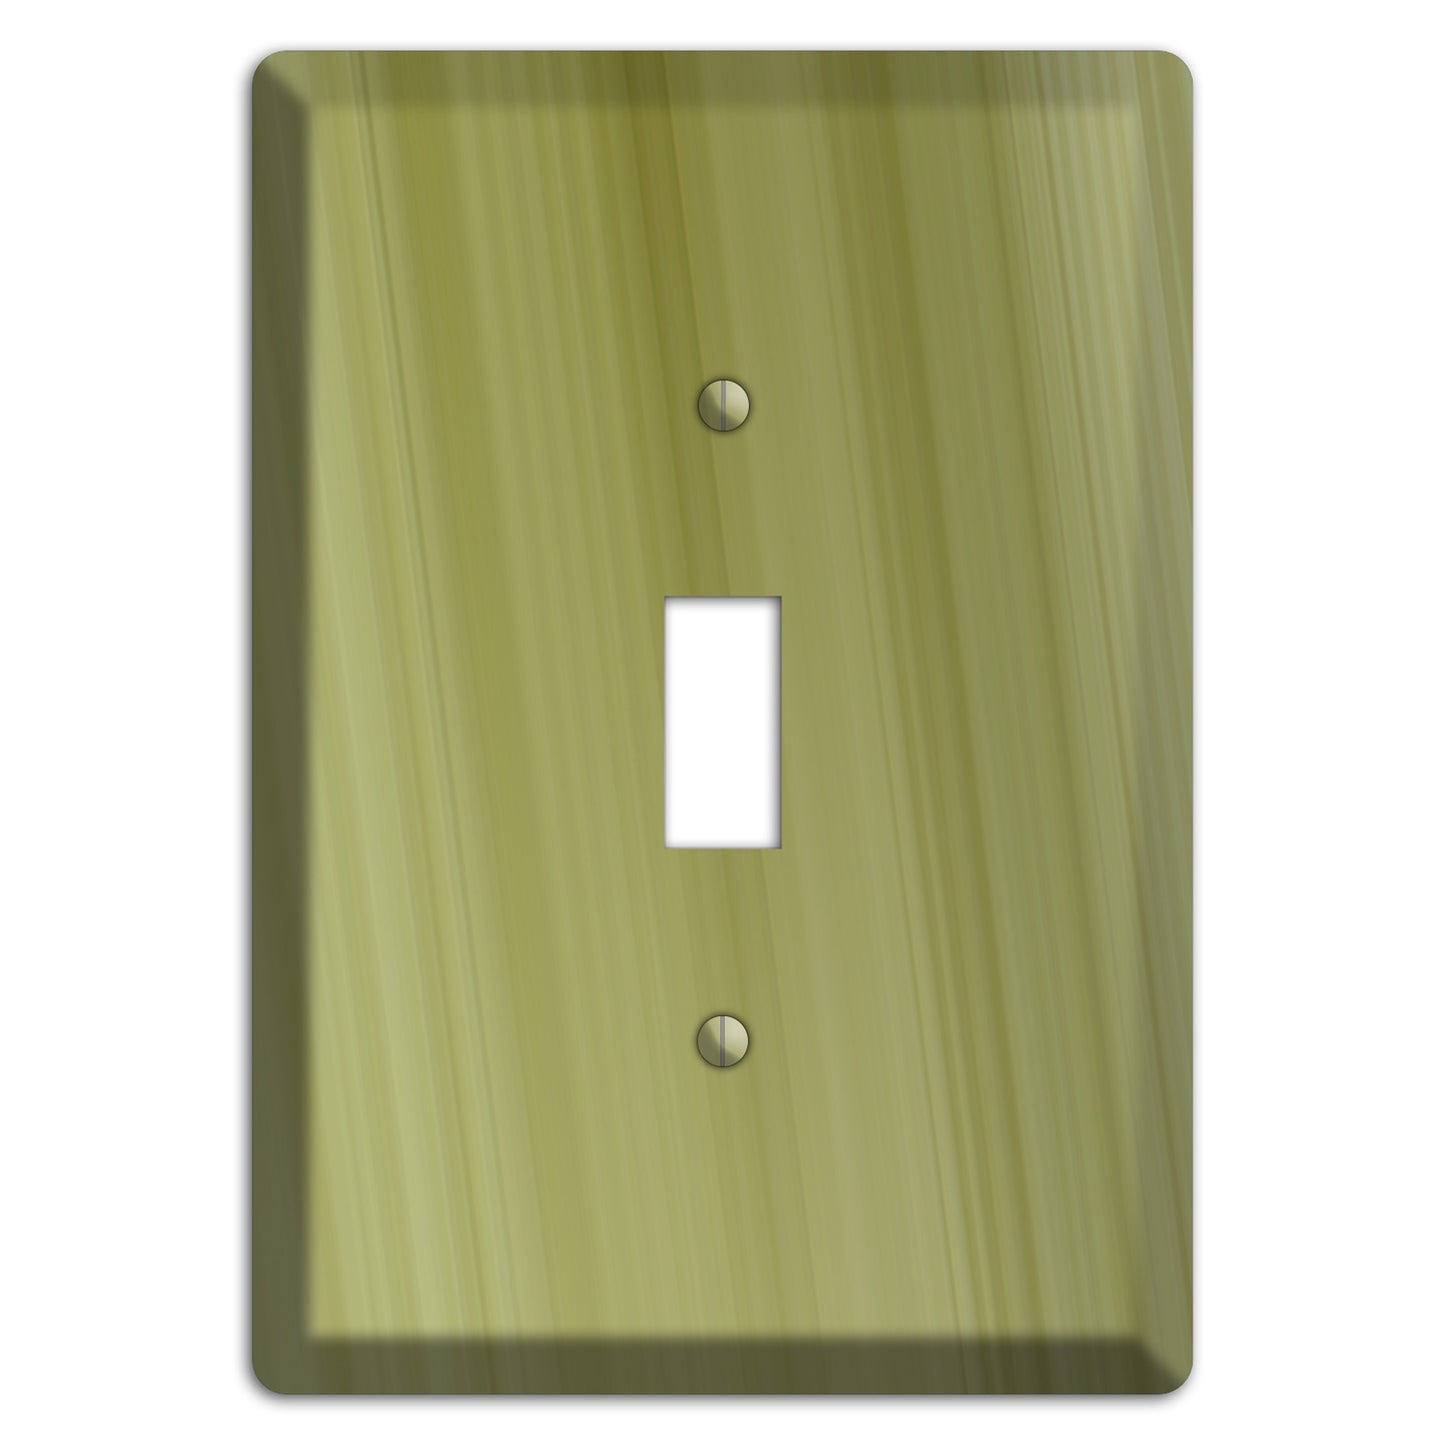 Olive Ray of Light Cover Plates